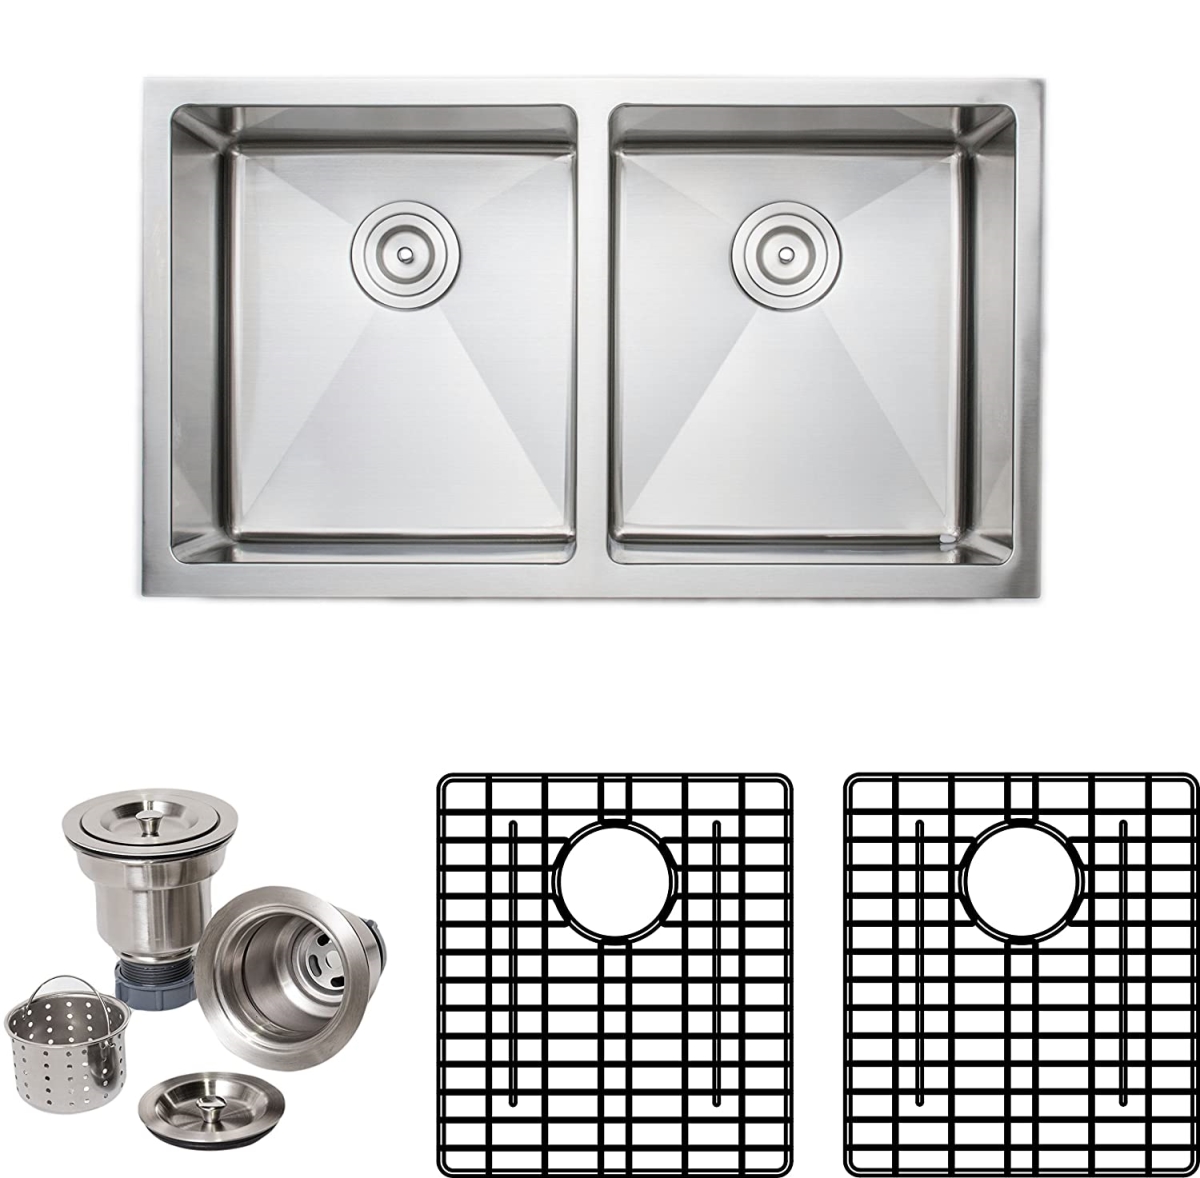 CSU3319-99-AP 33 in. 16 Gauge Handcrafted Apron Front Farmhouse 50-50 Double Bowl Stainless Steel Kitchen Sink -  Wells Sinkware